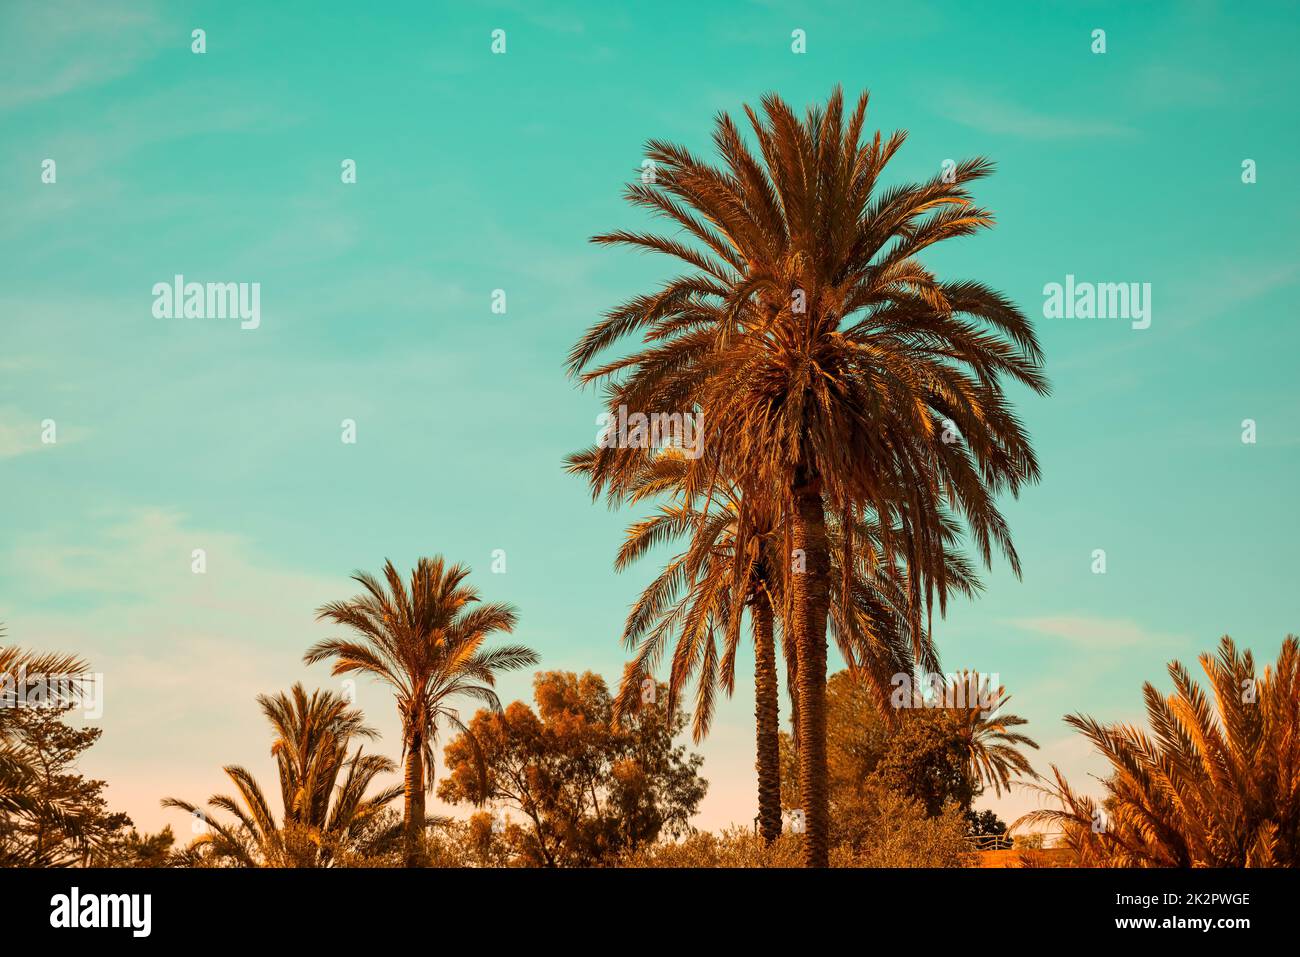 Palm trees with orange and teal effect Stock Photo